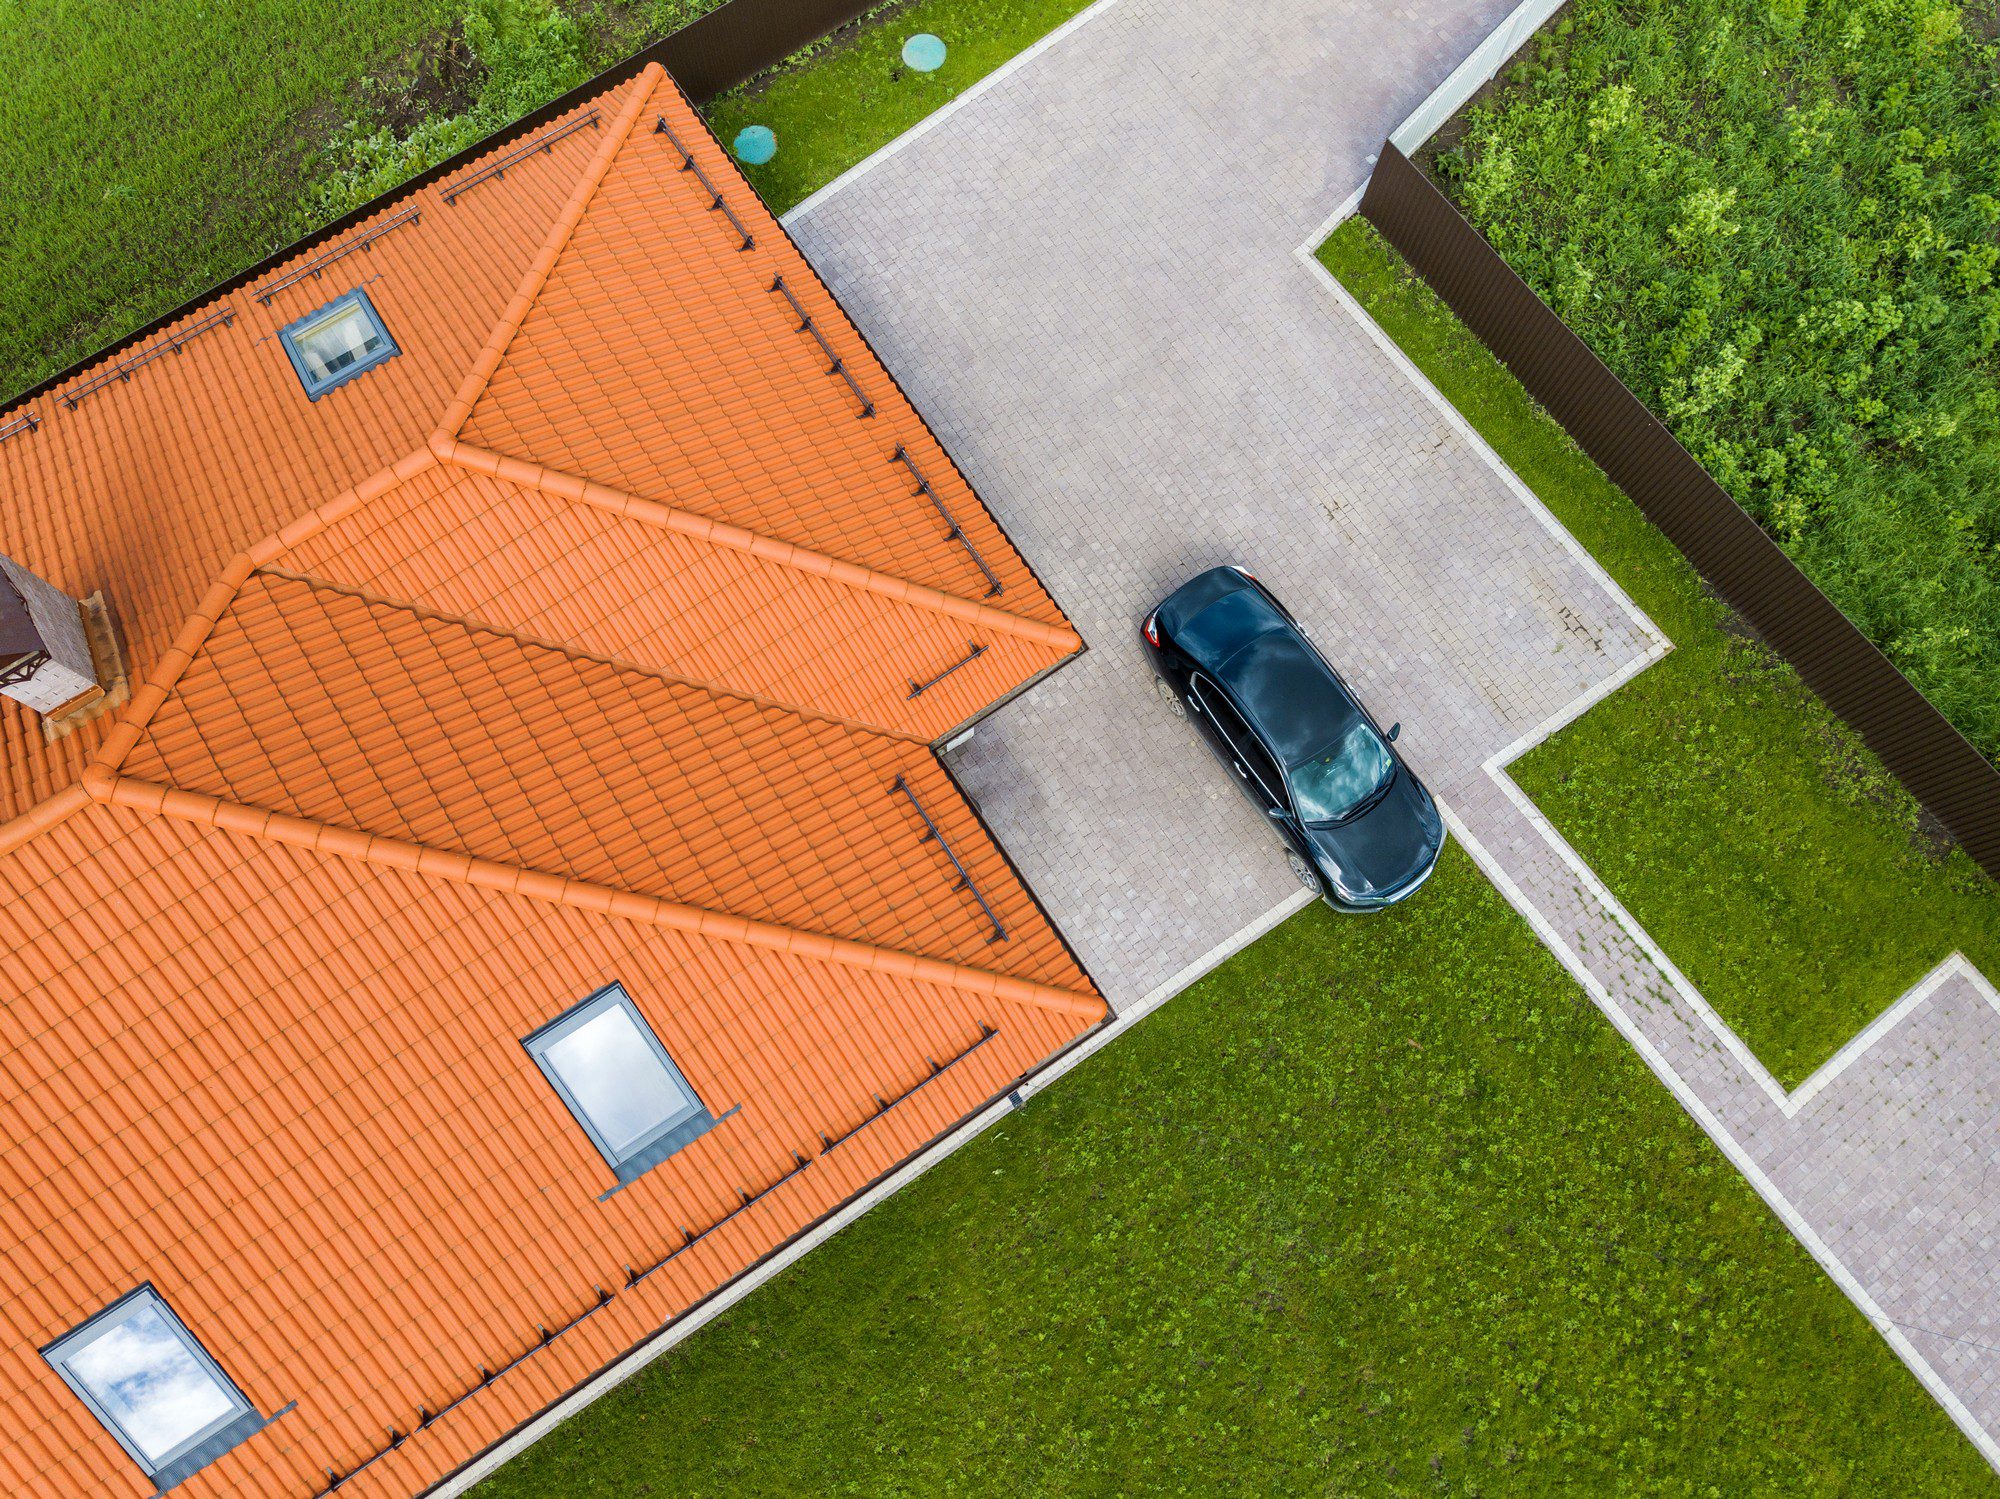 This is an aerial or top-down view of a building with a distinctive orange tiled roof. There's a car parked alongside the building on a paved area, and there are grassy areas surrounding the property. The architecture follows a symmetrical design, and it appears to be a residential area.